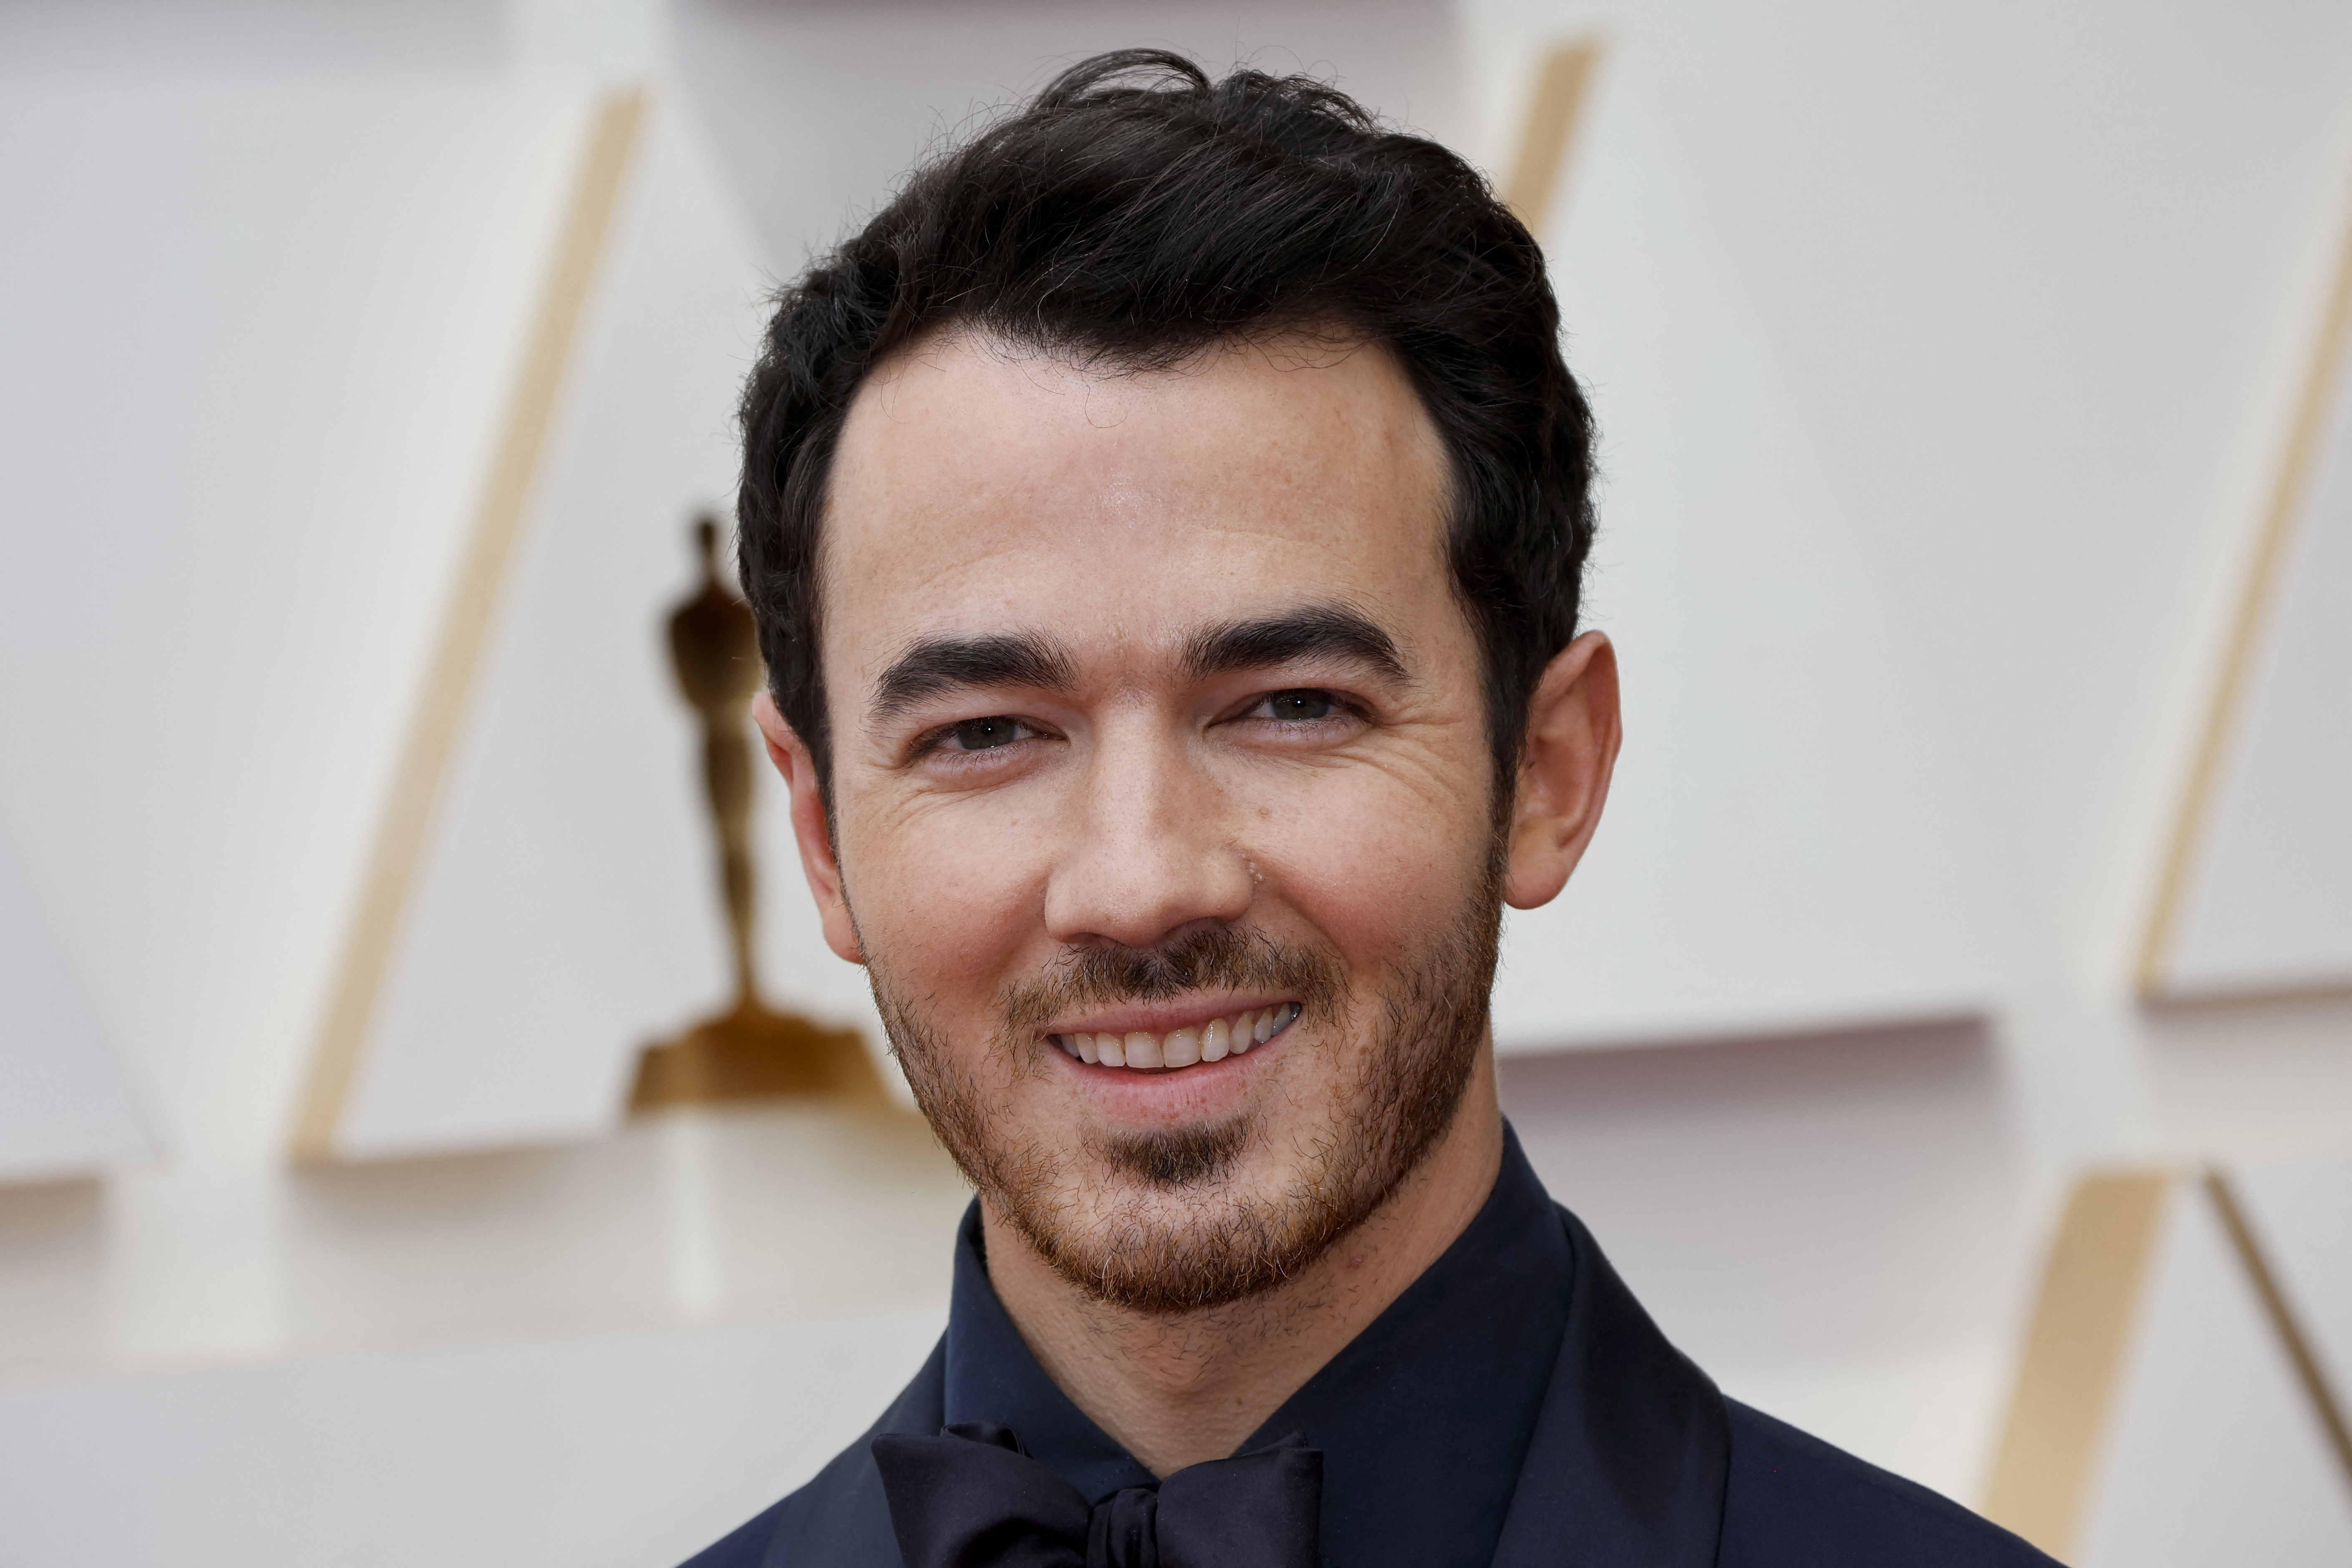 Kevin Jonas poses on the red carpet during the Oscars arrivals at the 94th Academy Awards in Hollywood, Los Angeles, California, U.S., March 27, 2022. REUTERS/Eric Gaillard